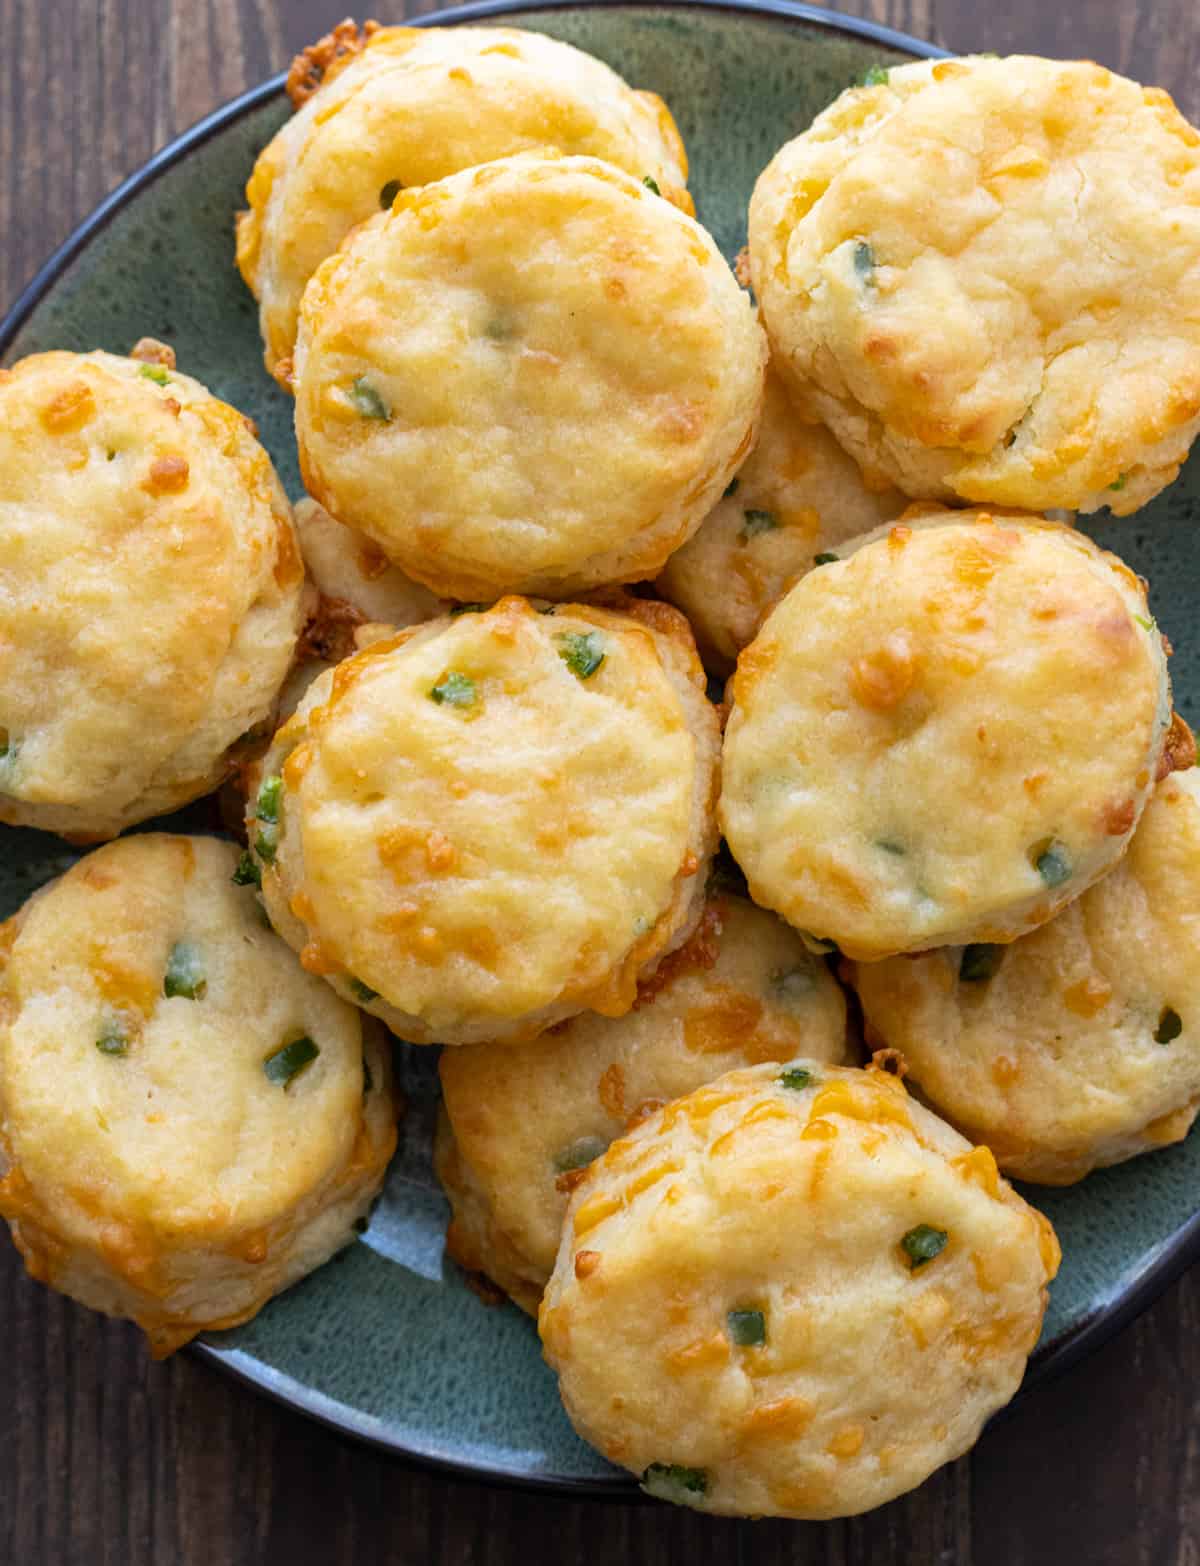 Cheddar jalapeño biscuits piled up on a plate.